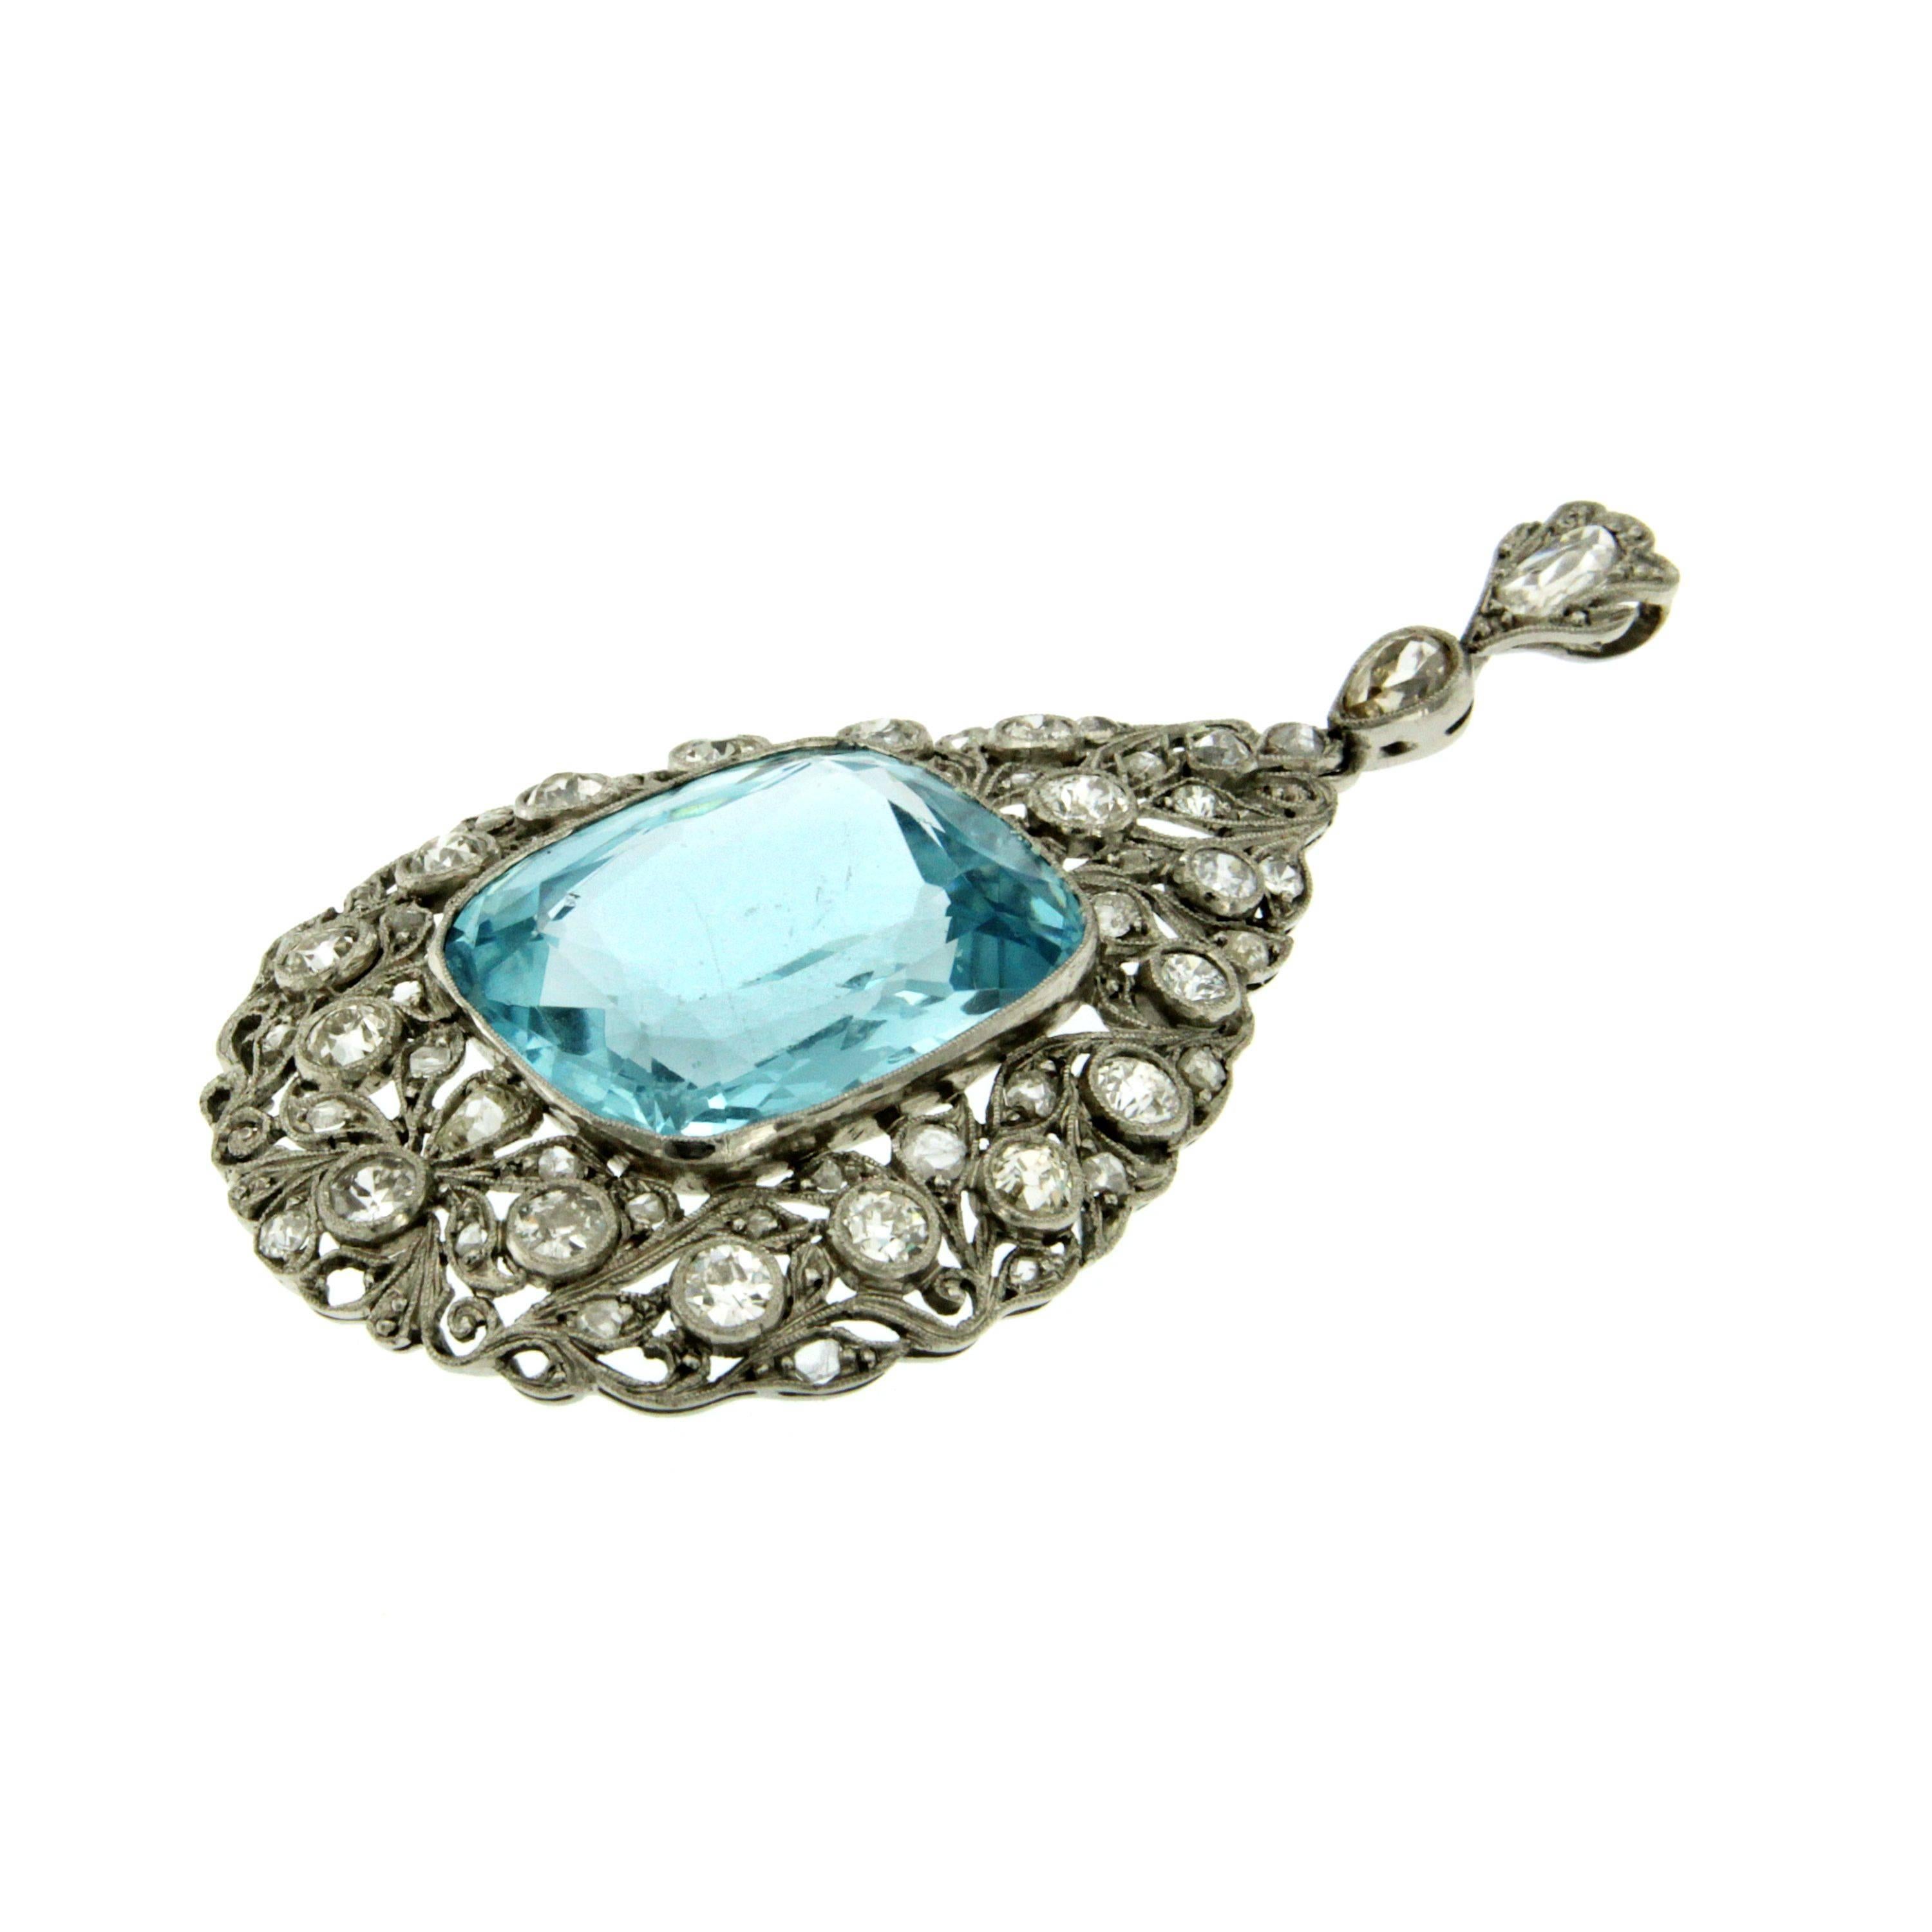 This pendant is set with a central synthetic stone accentuated by 3.50ct. of round brilliant cut diamonds G/H color Vvs.
Hand crafted in 18k Gold. Circa 1930

CONDITION: Pre-owned - Excellent
GEM STONES: Synthetic stone, Diamonds 3.50 total